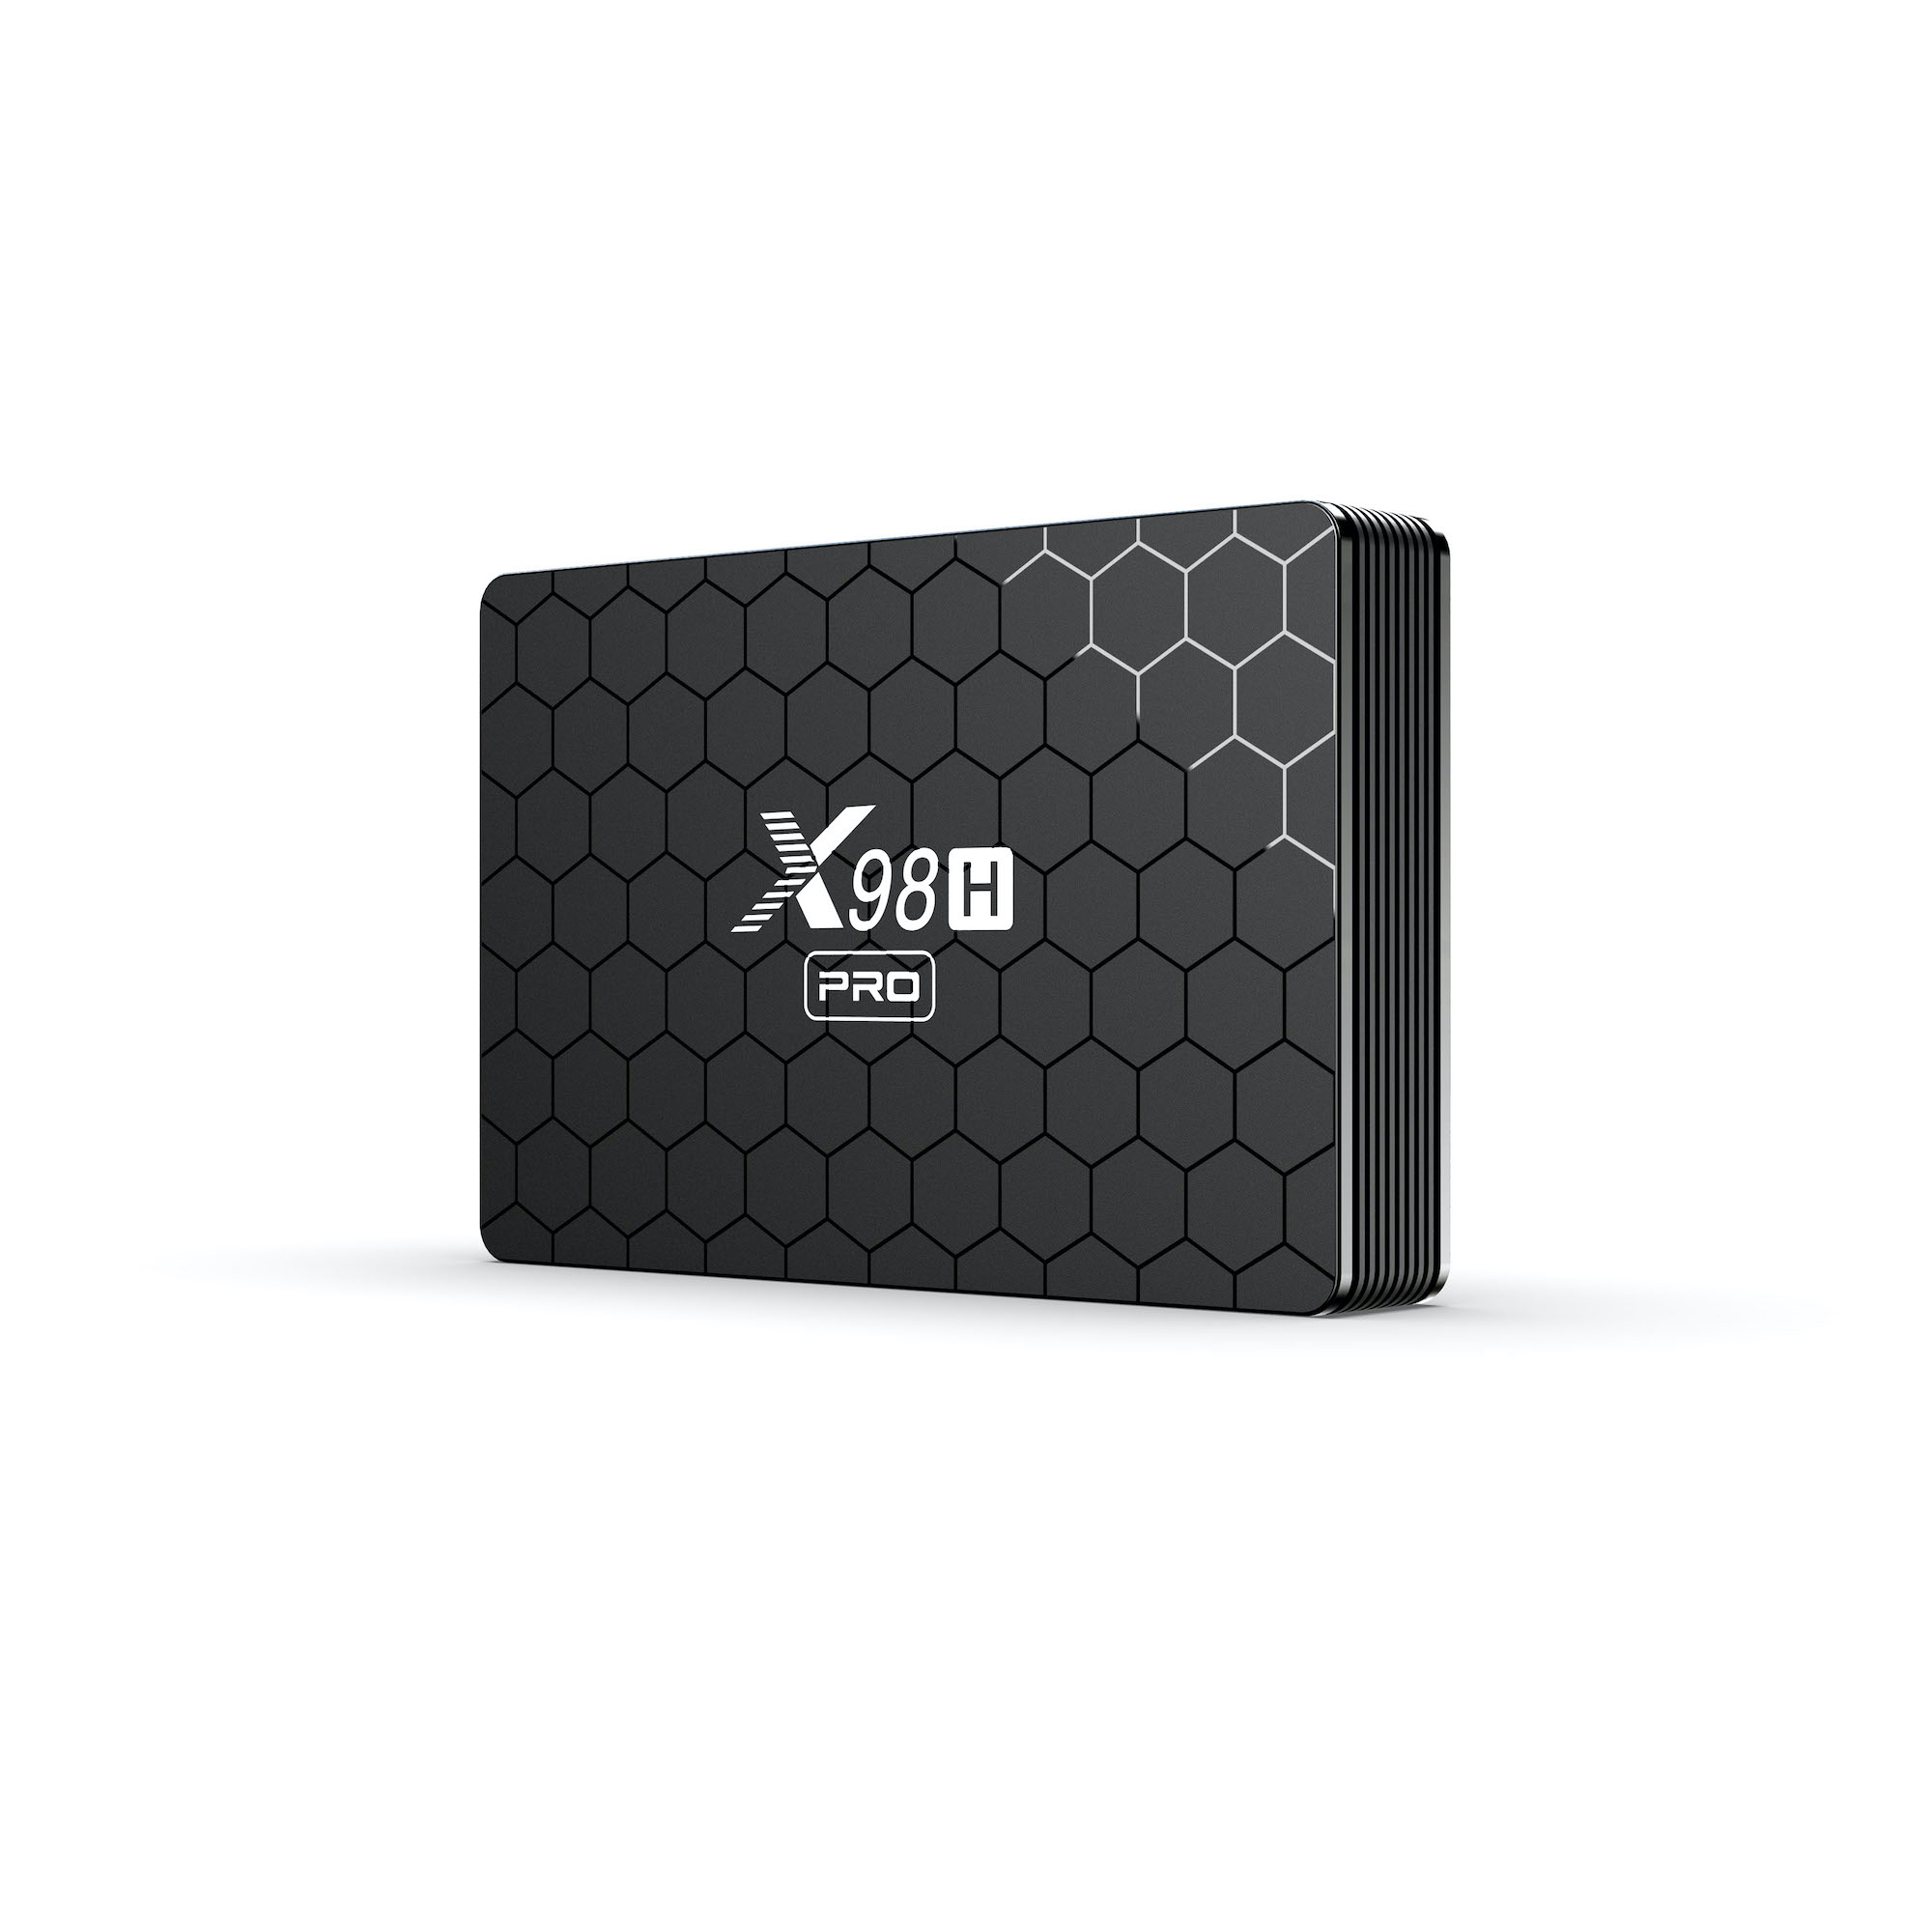 X98H Pro H618 android 12 TV box19